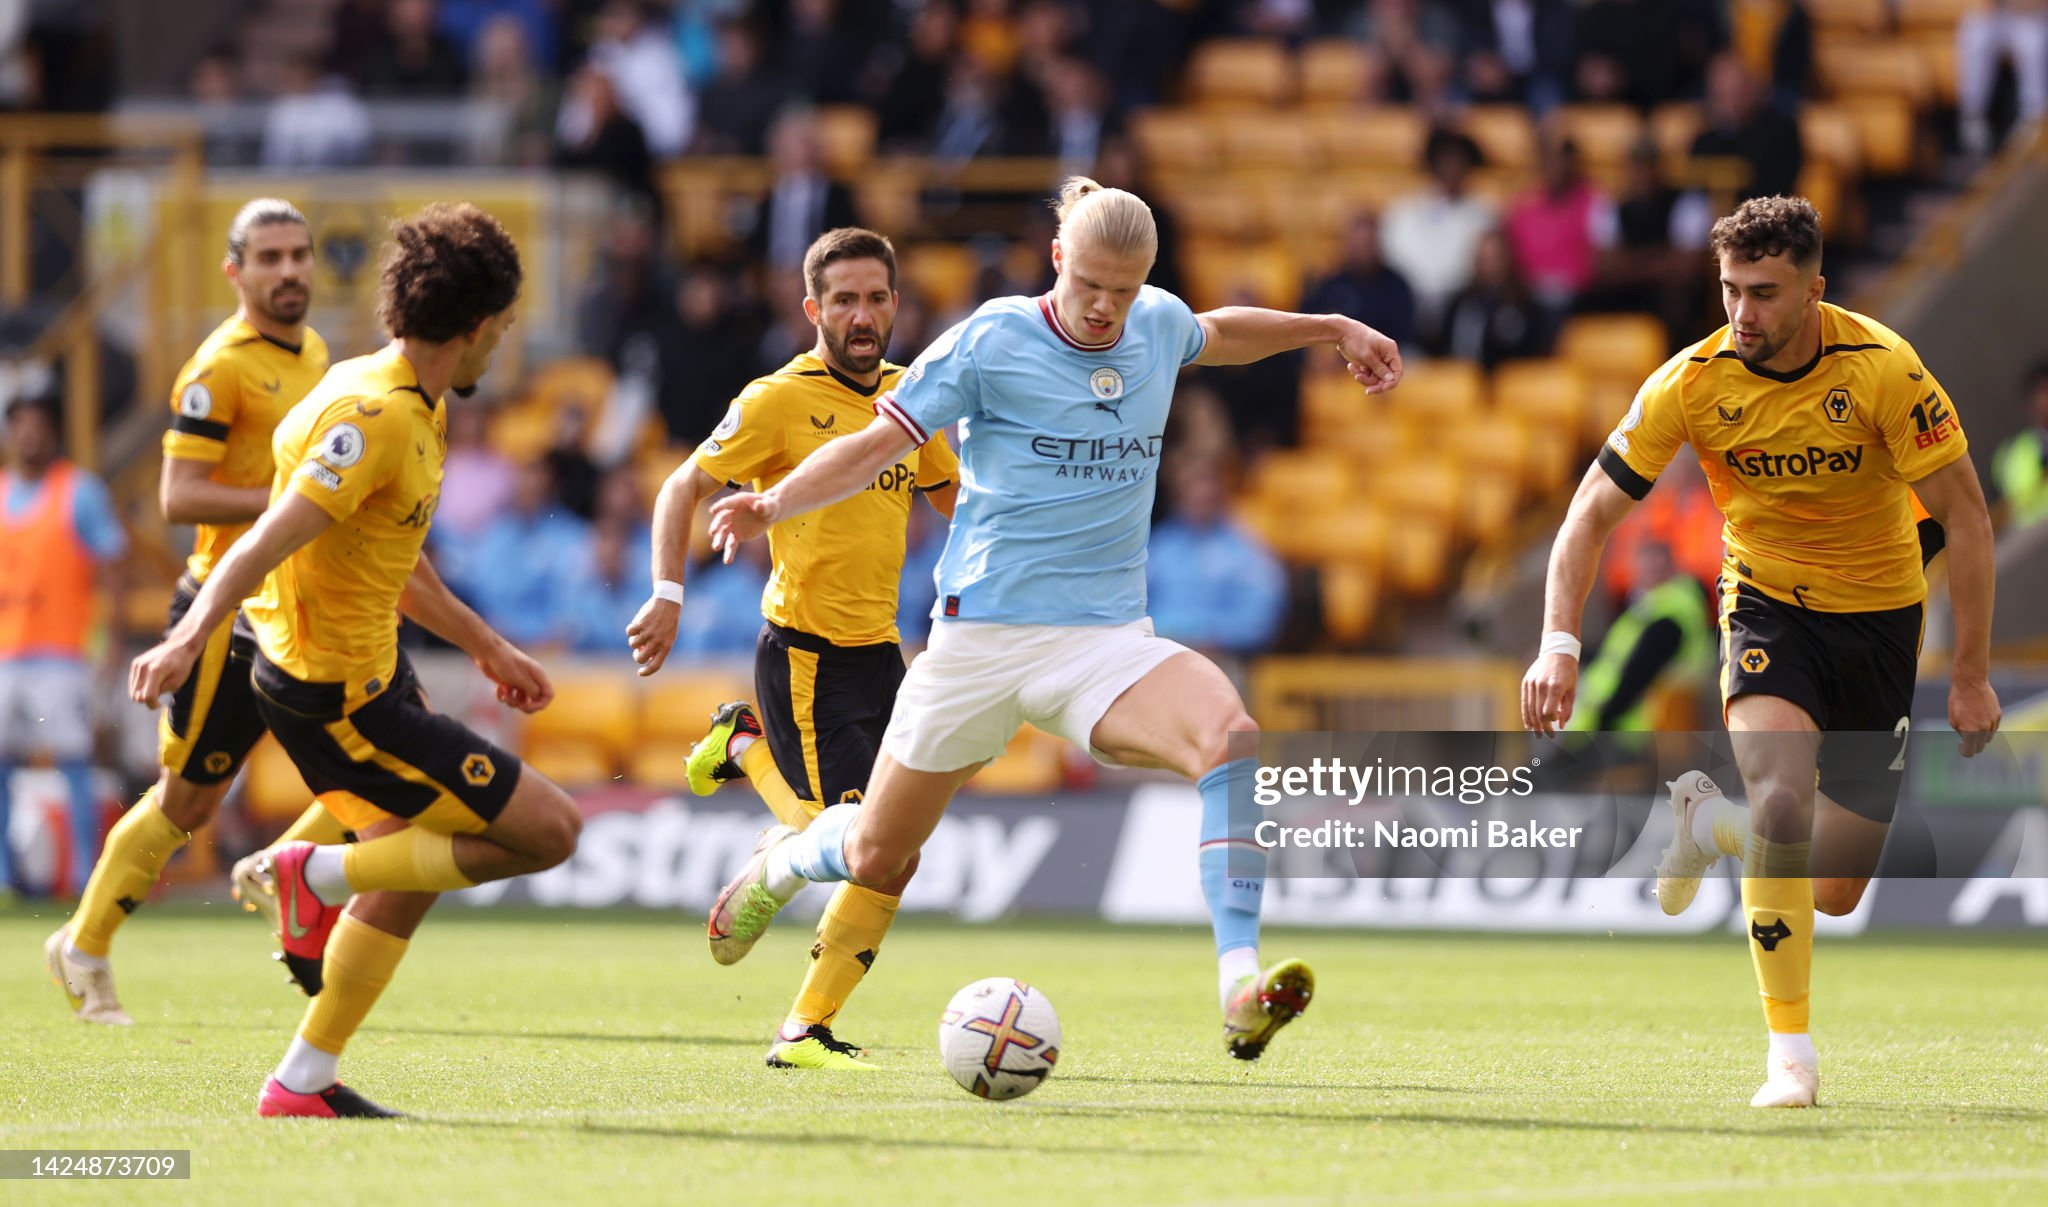 Manchester City vs Wolves preview, prediction and odds